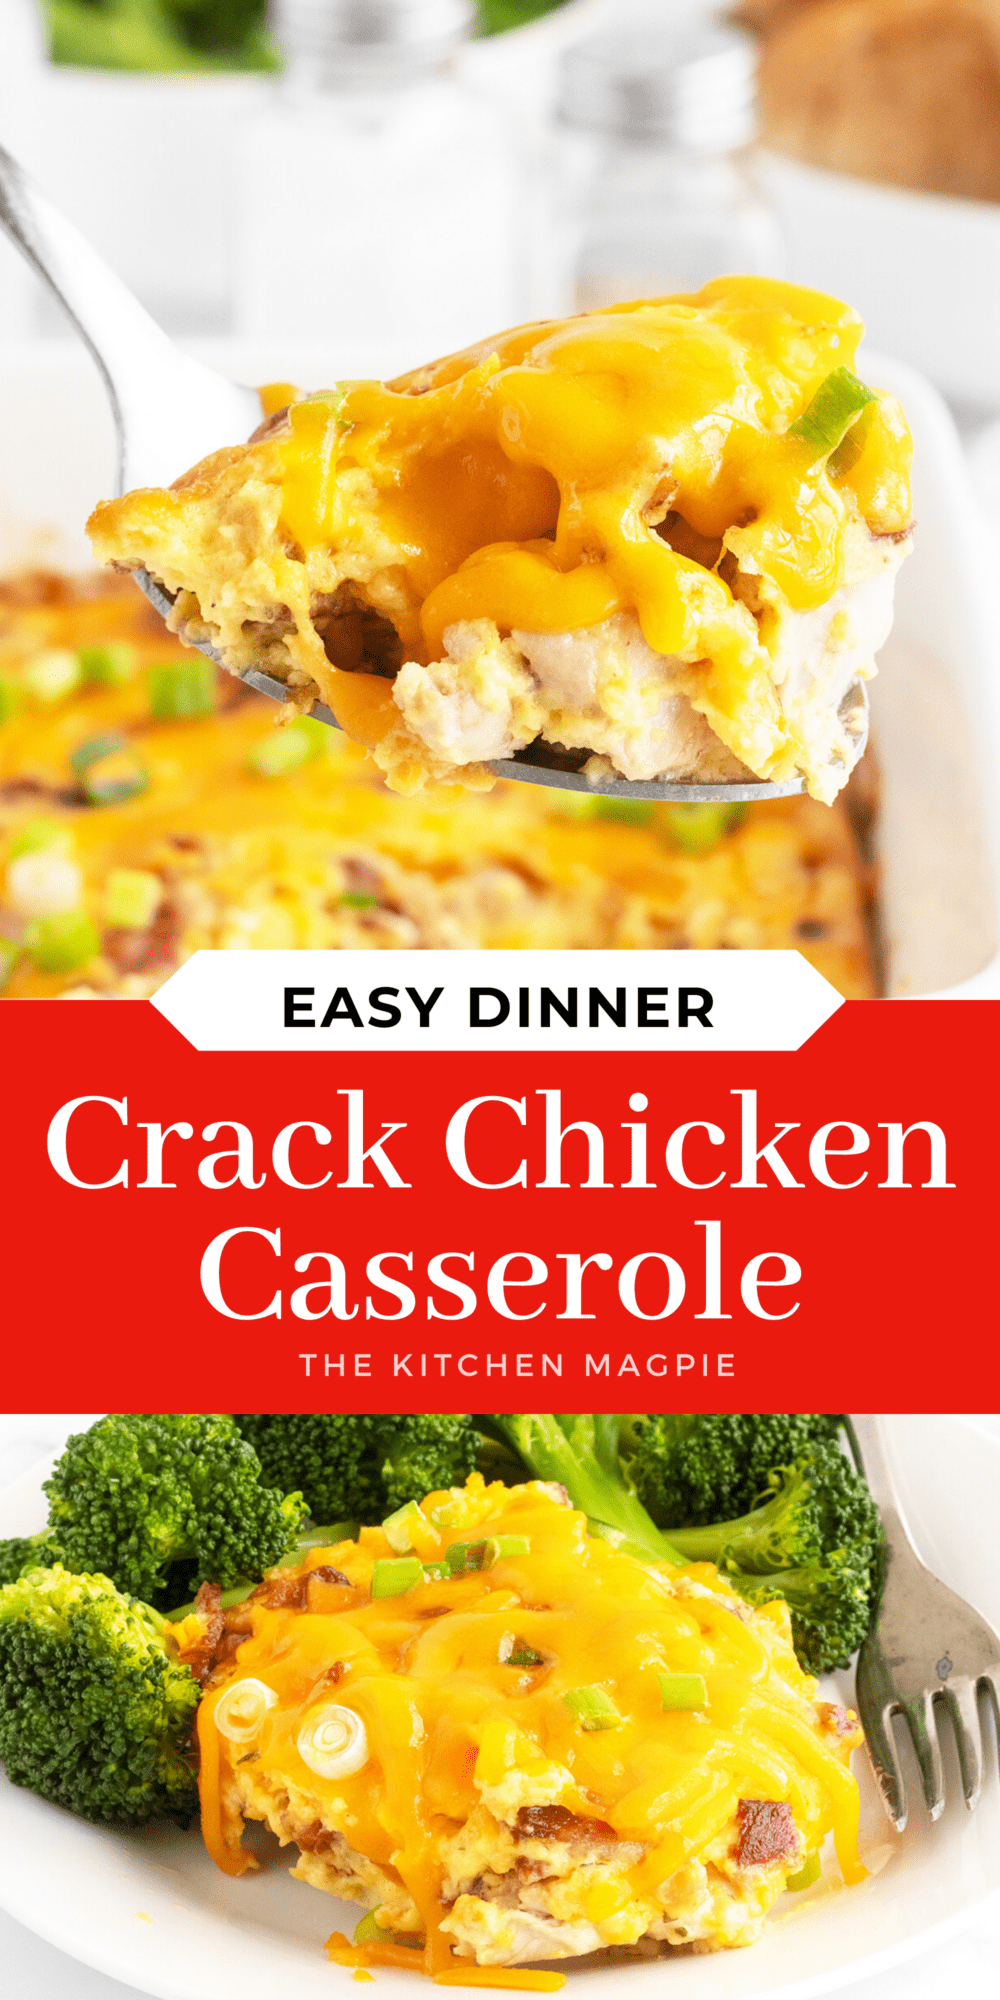 Juicy, filling, and surprisingly addictive, this recipe for a chicken casserole is very aptly named. It is definitely not a healthy weeknight meal, but it is absolutely worth it to make a big batch and just indulge once in a while.